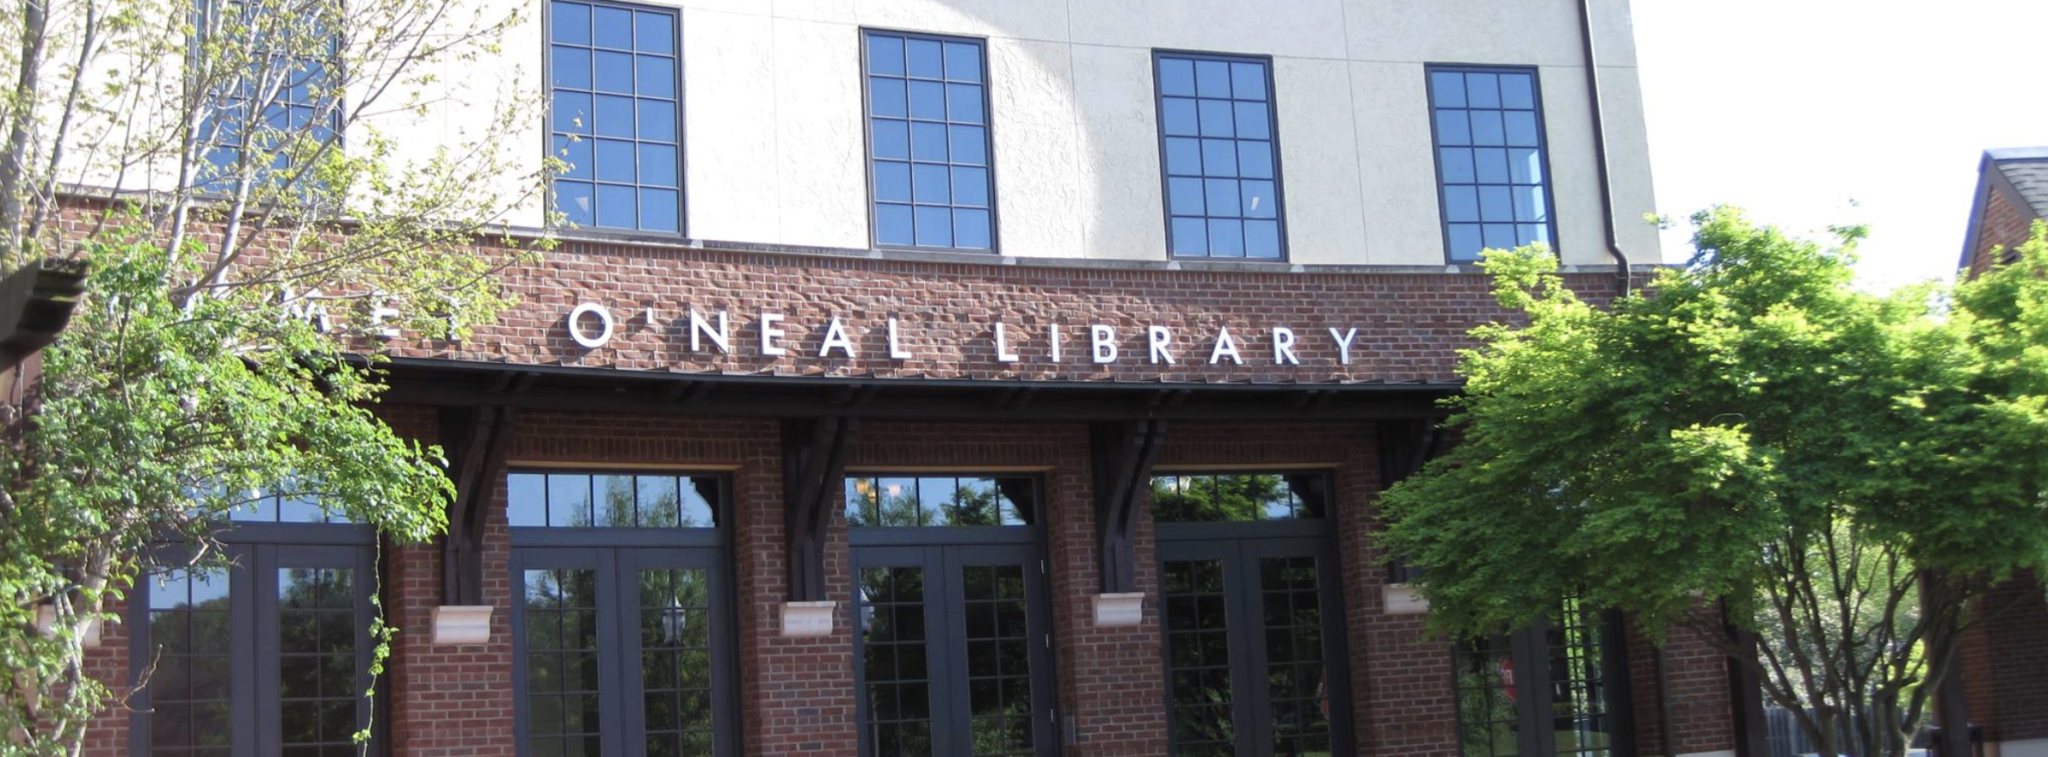 The O'Neal Library is the new name for the Mountain Brook Library